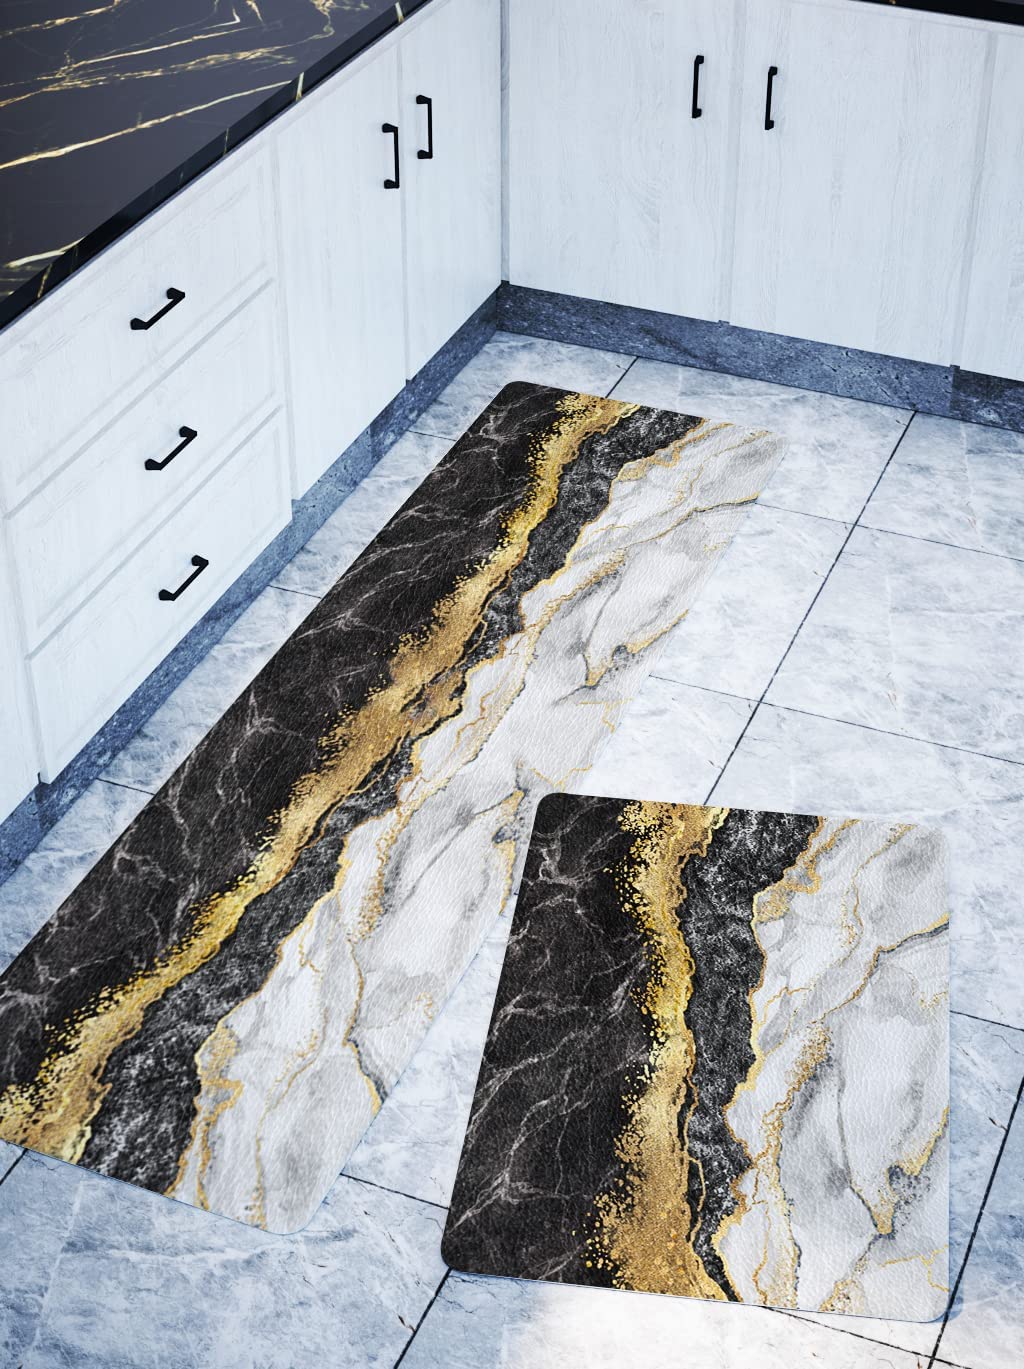 Black and Gold Marble Kitchen Mat Geometric Kitchen Rugs Set of 2